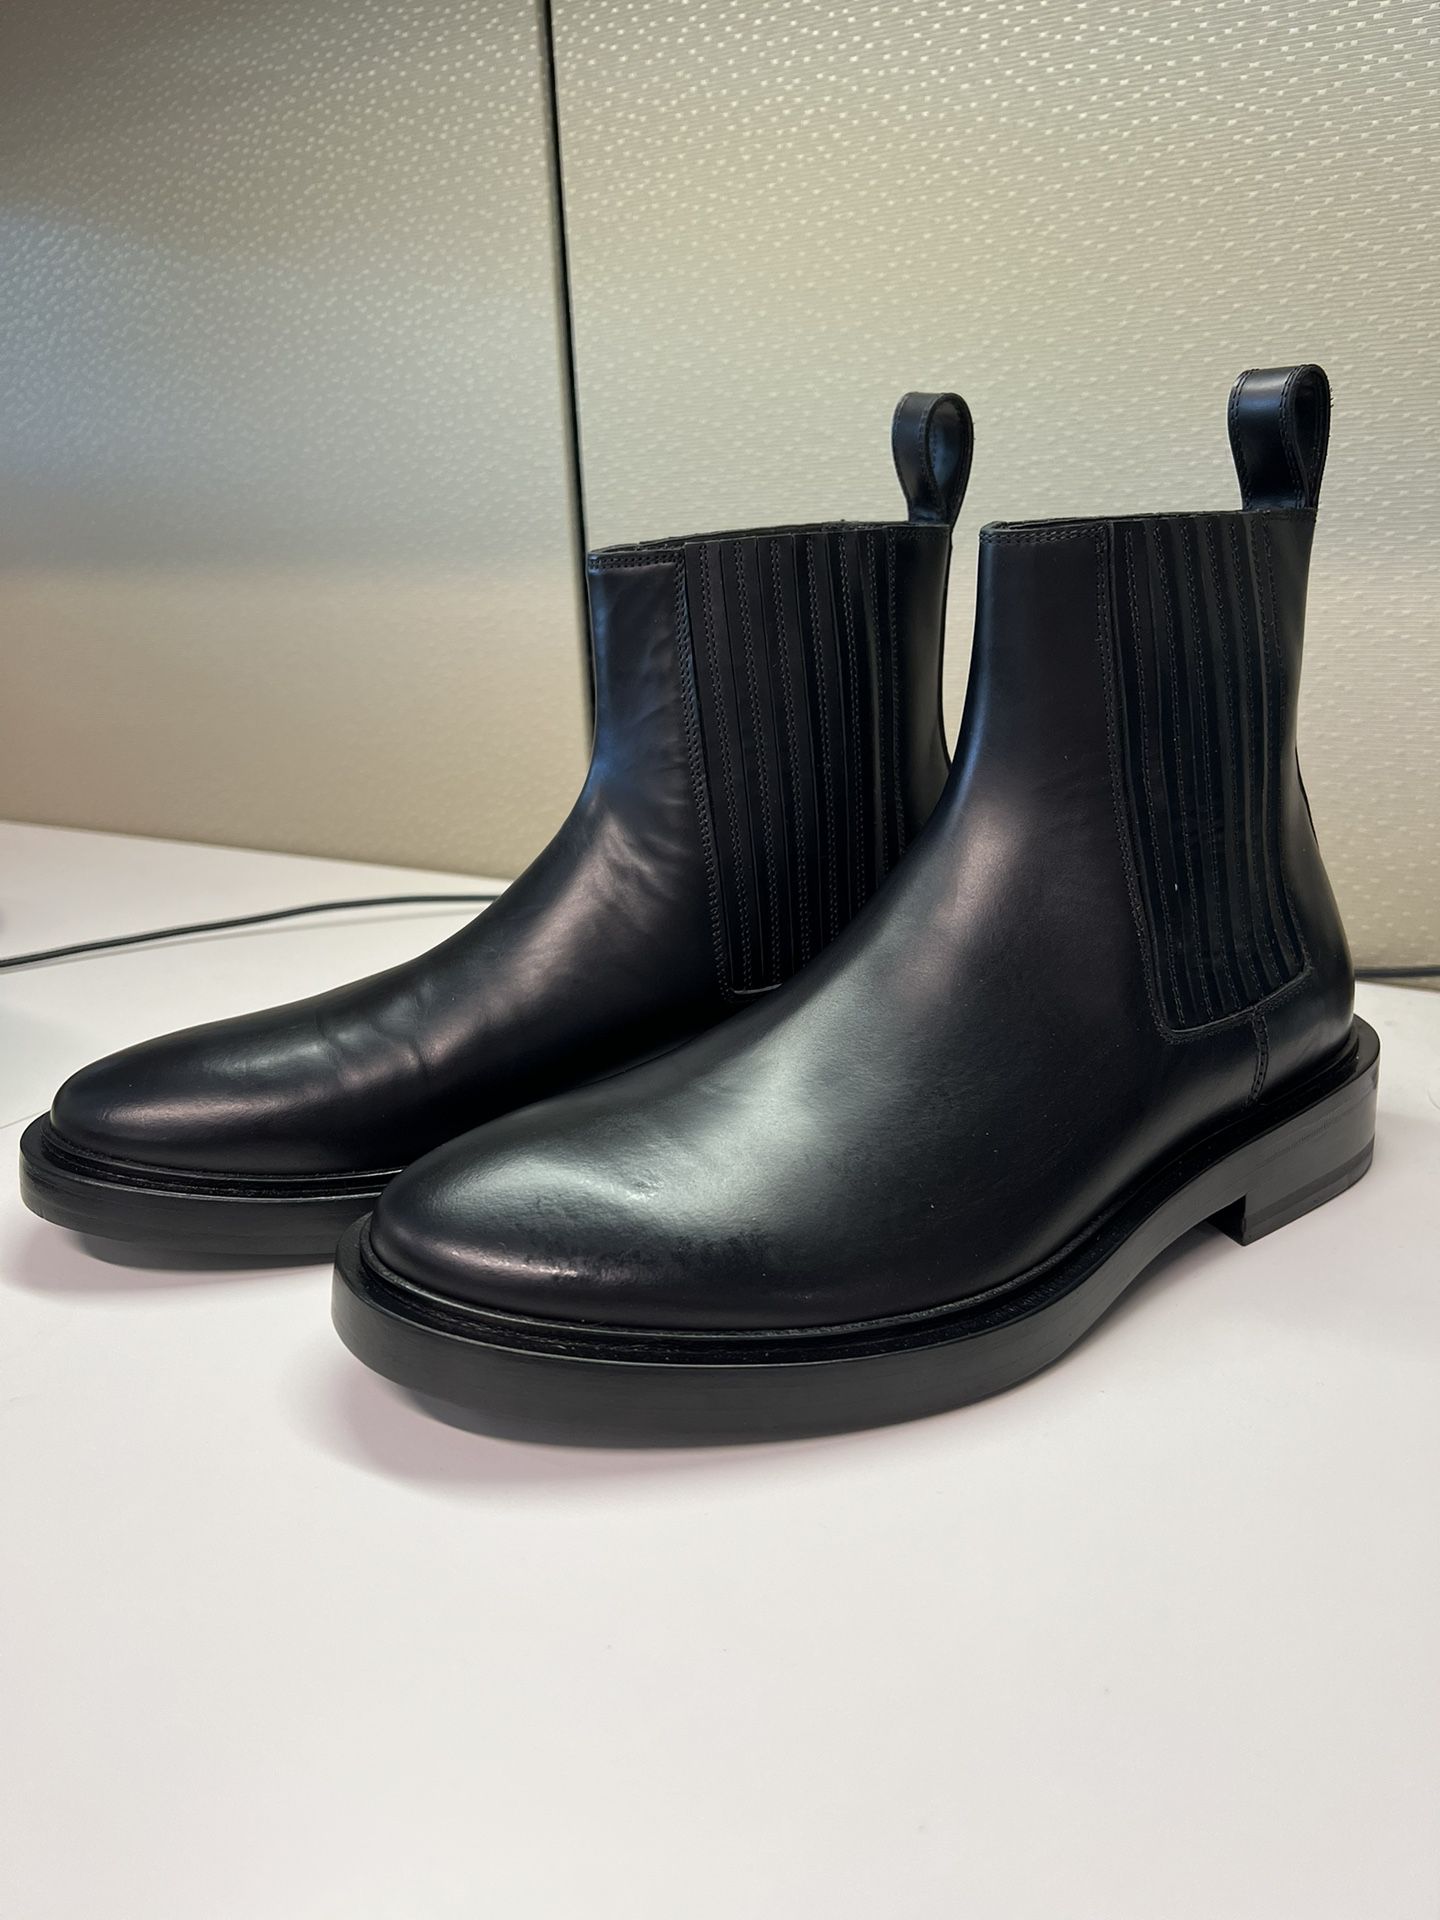 Balenciaga Boots - 8 for Sale in HI - OfferUp